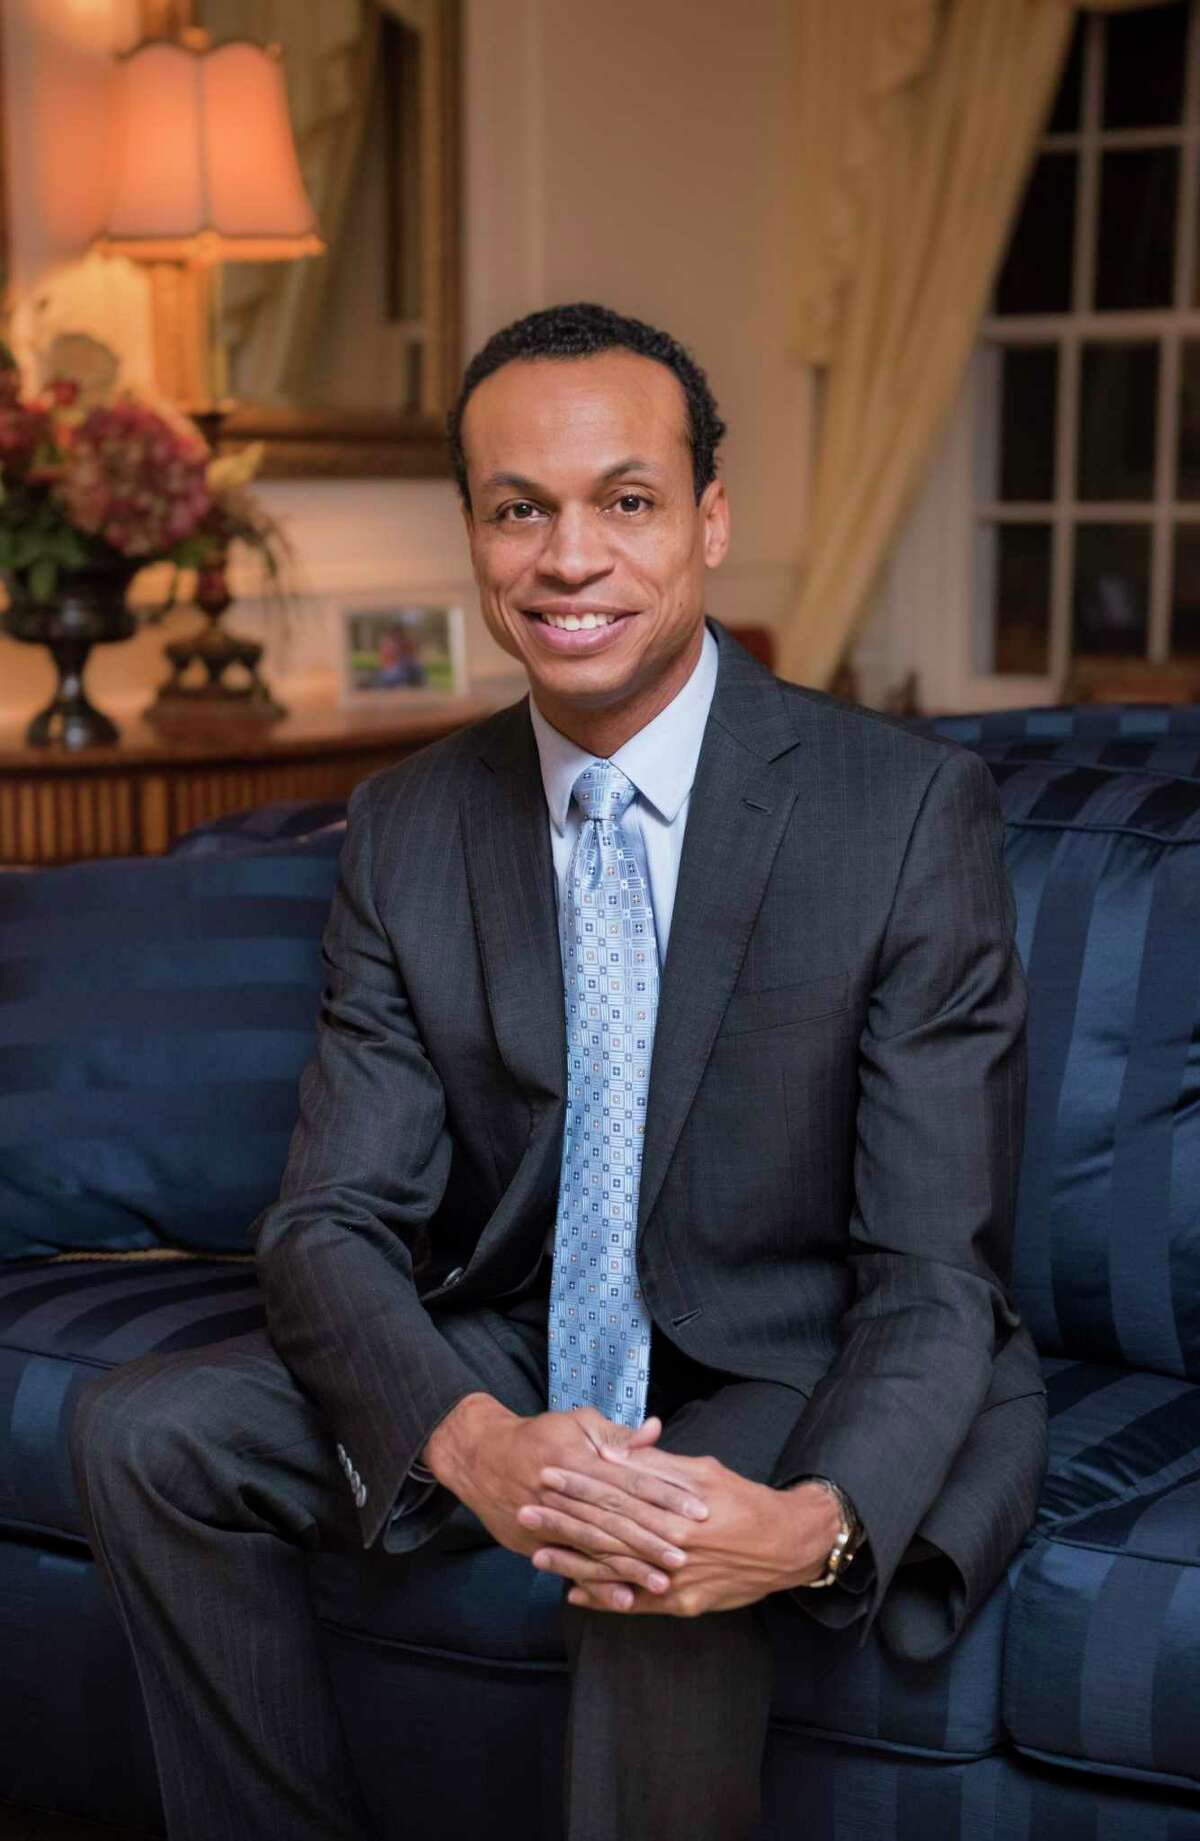 In 2020, Connecticut Treasurer Shawn Wooden launched the Corporate Call to Action: Coalition for Equity & Opportunity in partnership with the Ford Foundation.